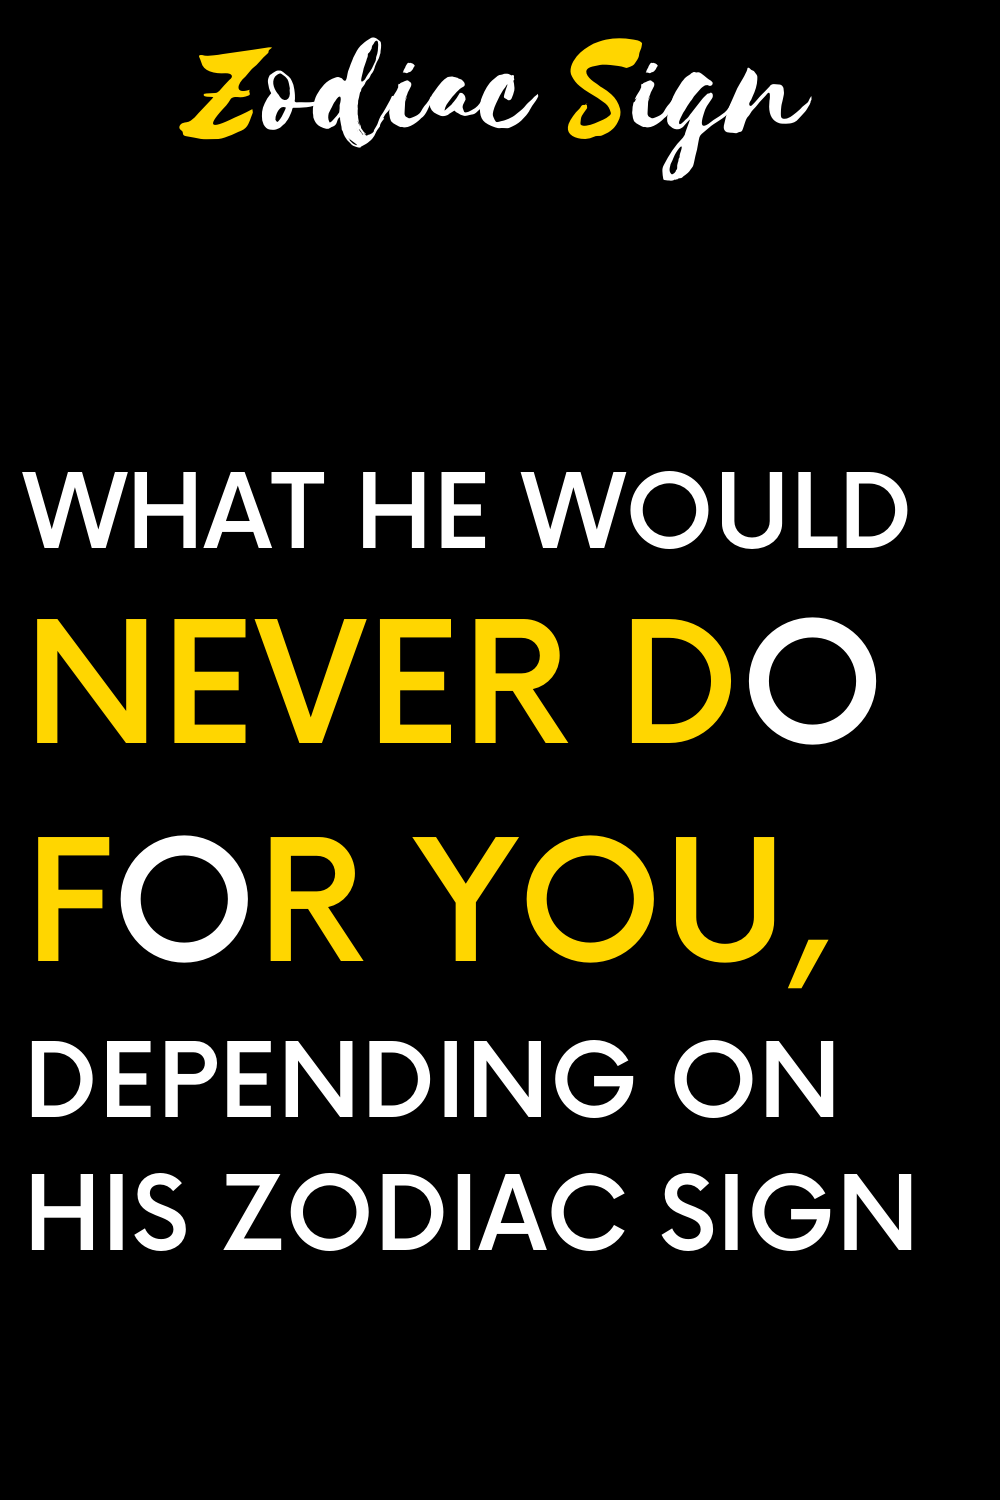 What he would never do for you, depending on his zodiac sign